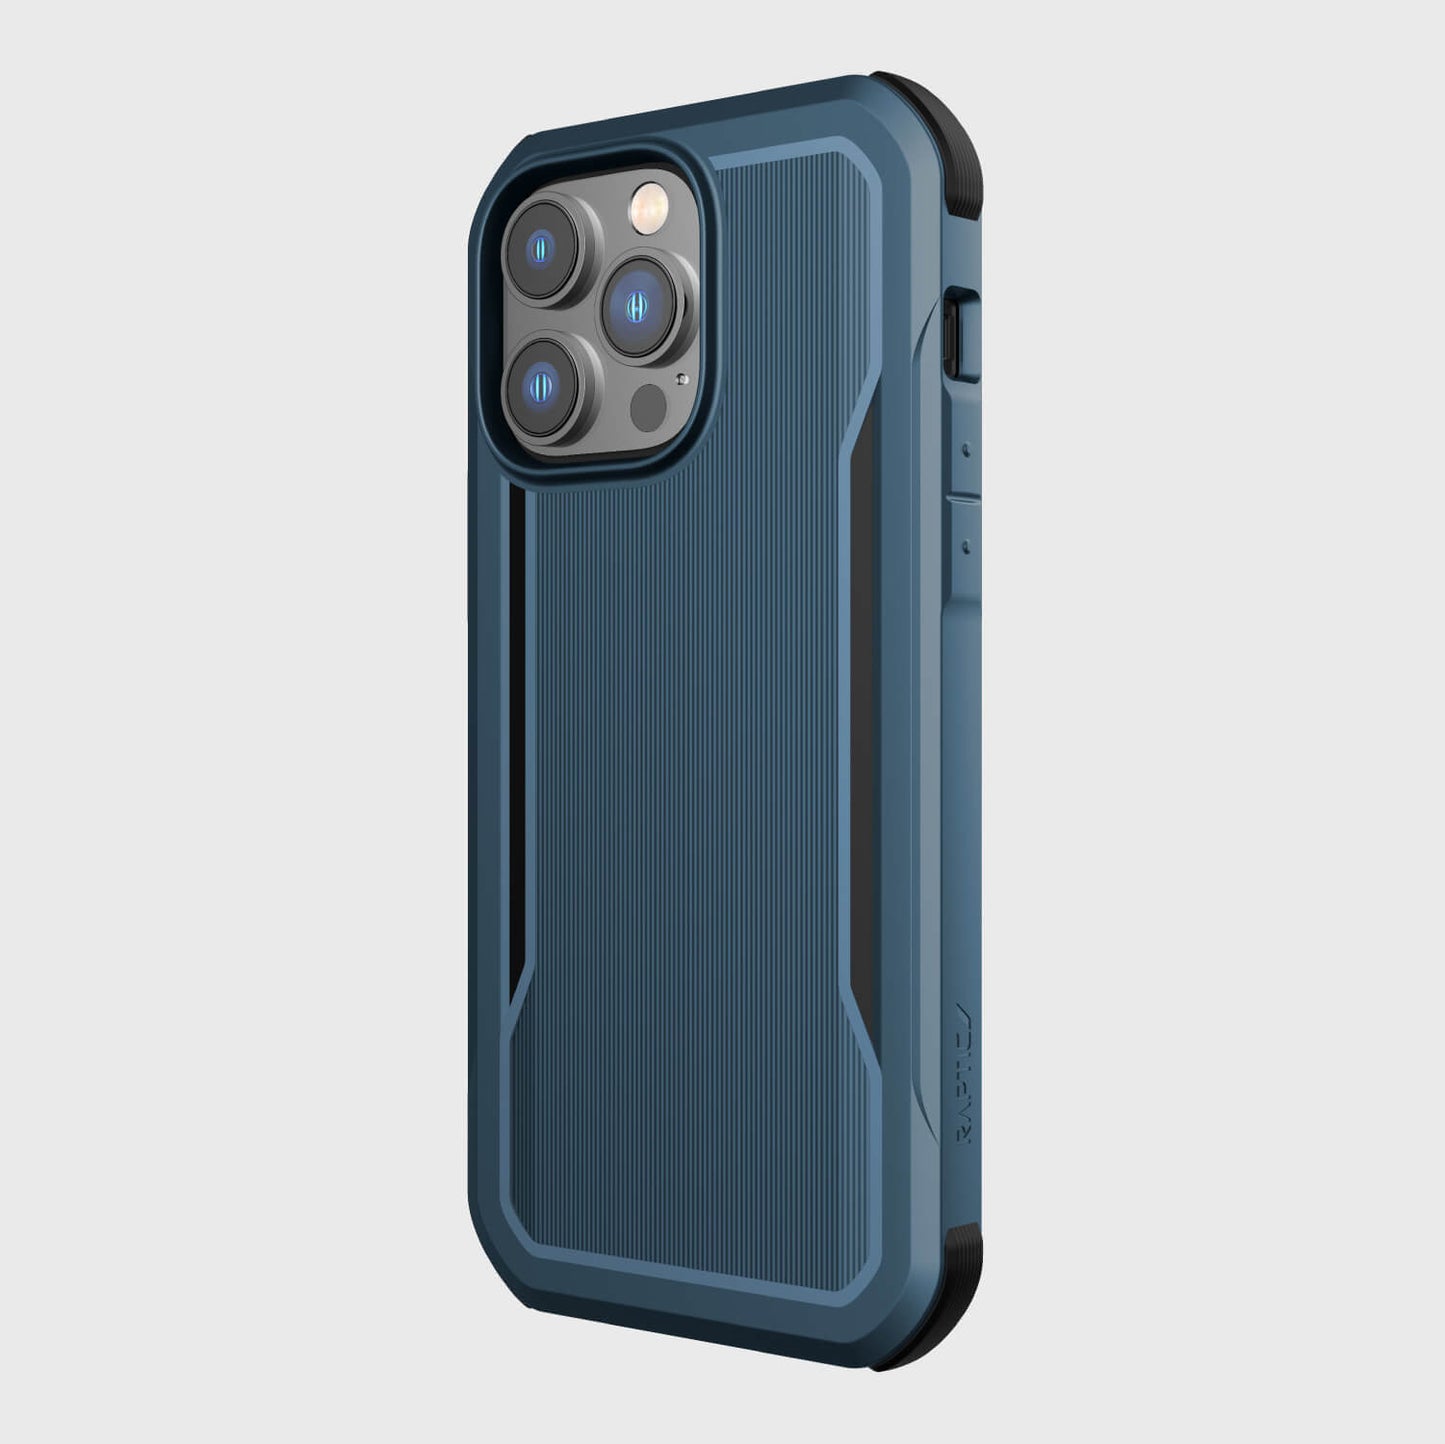 The Raptic iPhone 14/15 Pro Max Case - Fort Built for MagSafe, with military-grade drop protection, is shown in blue.